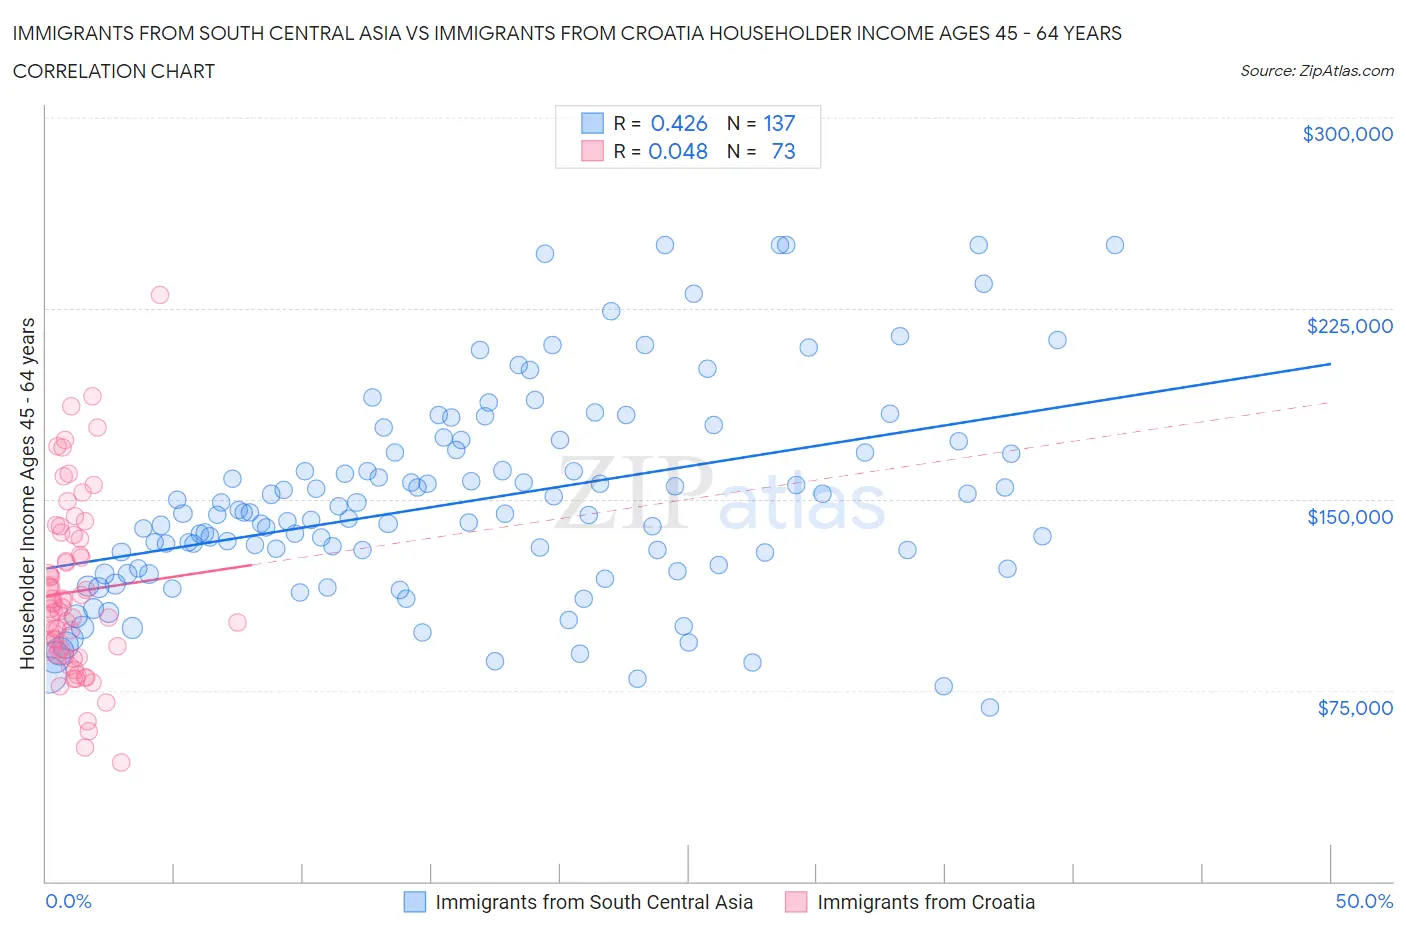 Immigrants from South Central Asia vs Immigrants from Croatia Householder Income Ages 45 - 64 years